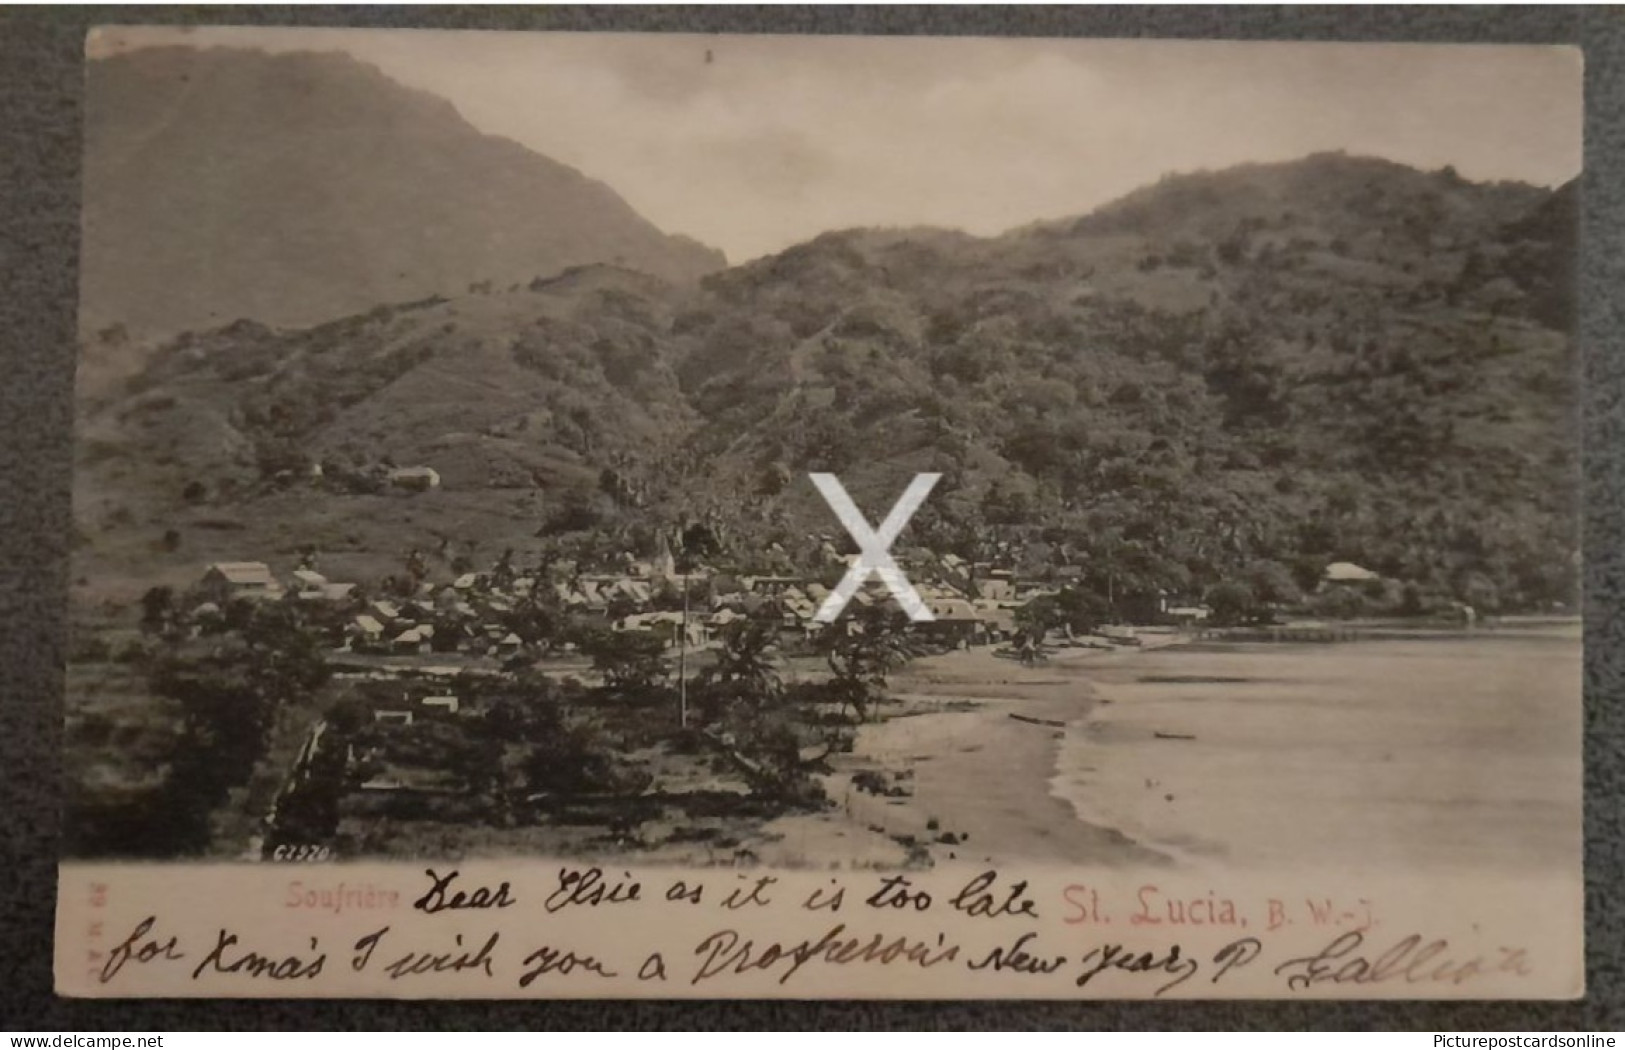 ST LUCIA SOUFRIERE NICE OLD B/W POSTCARD ANTILLES AMERICA POSTED TO GUERNSEY - St. Lucia